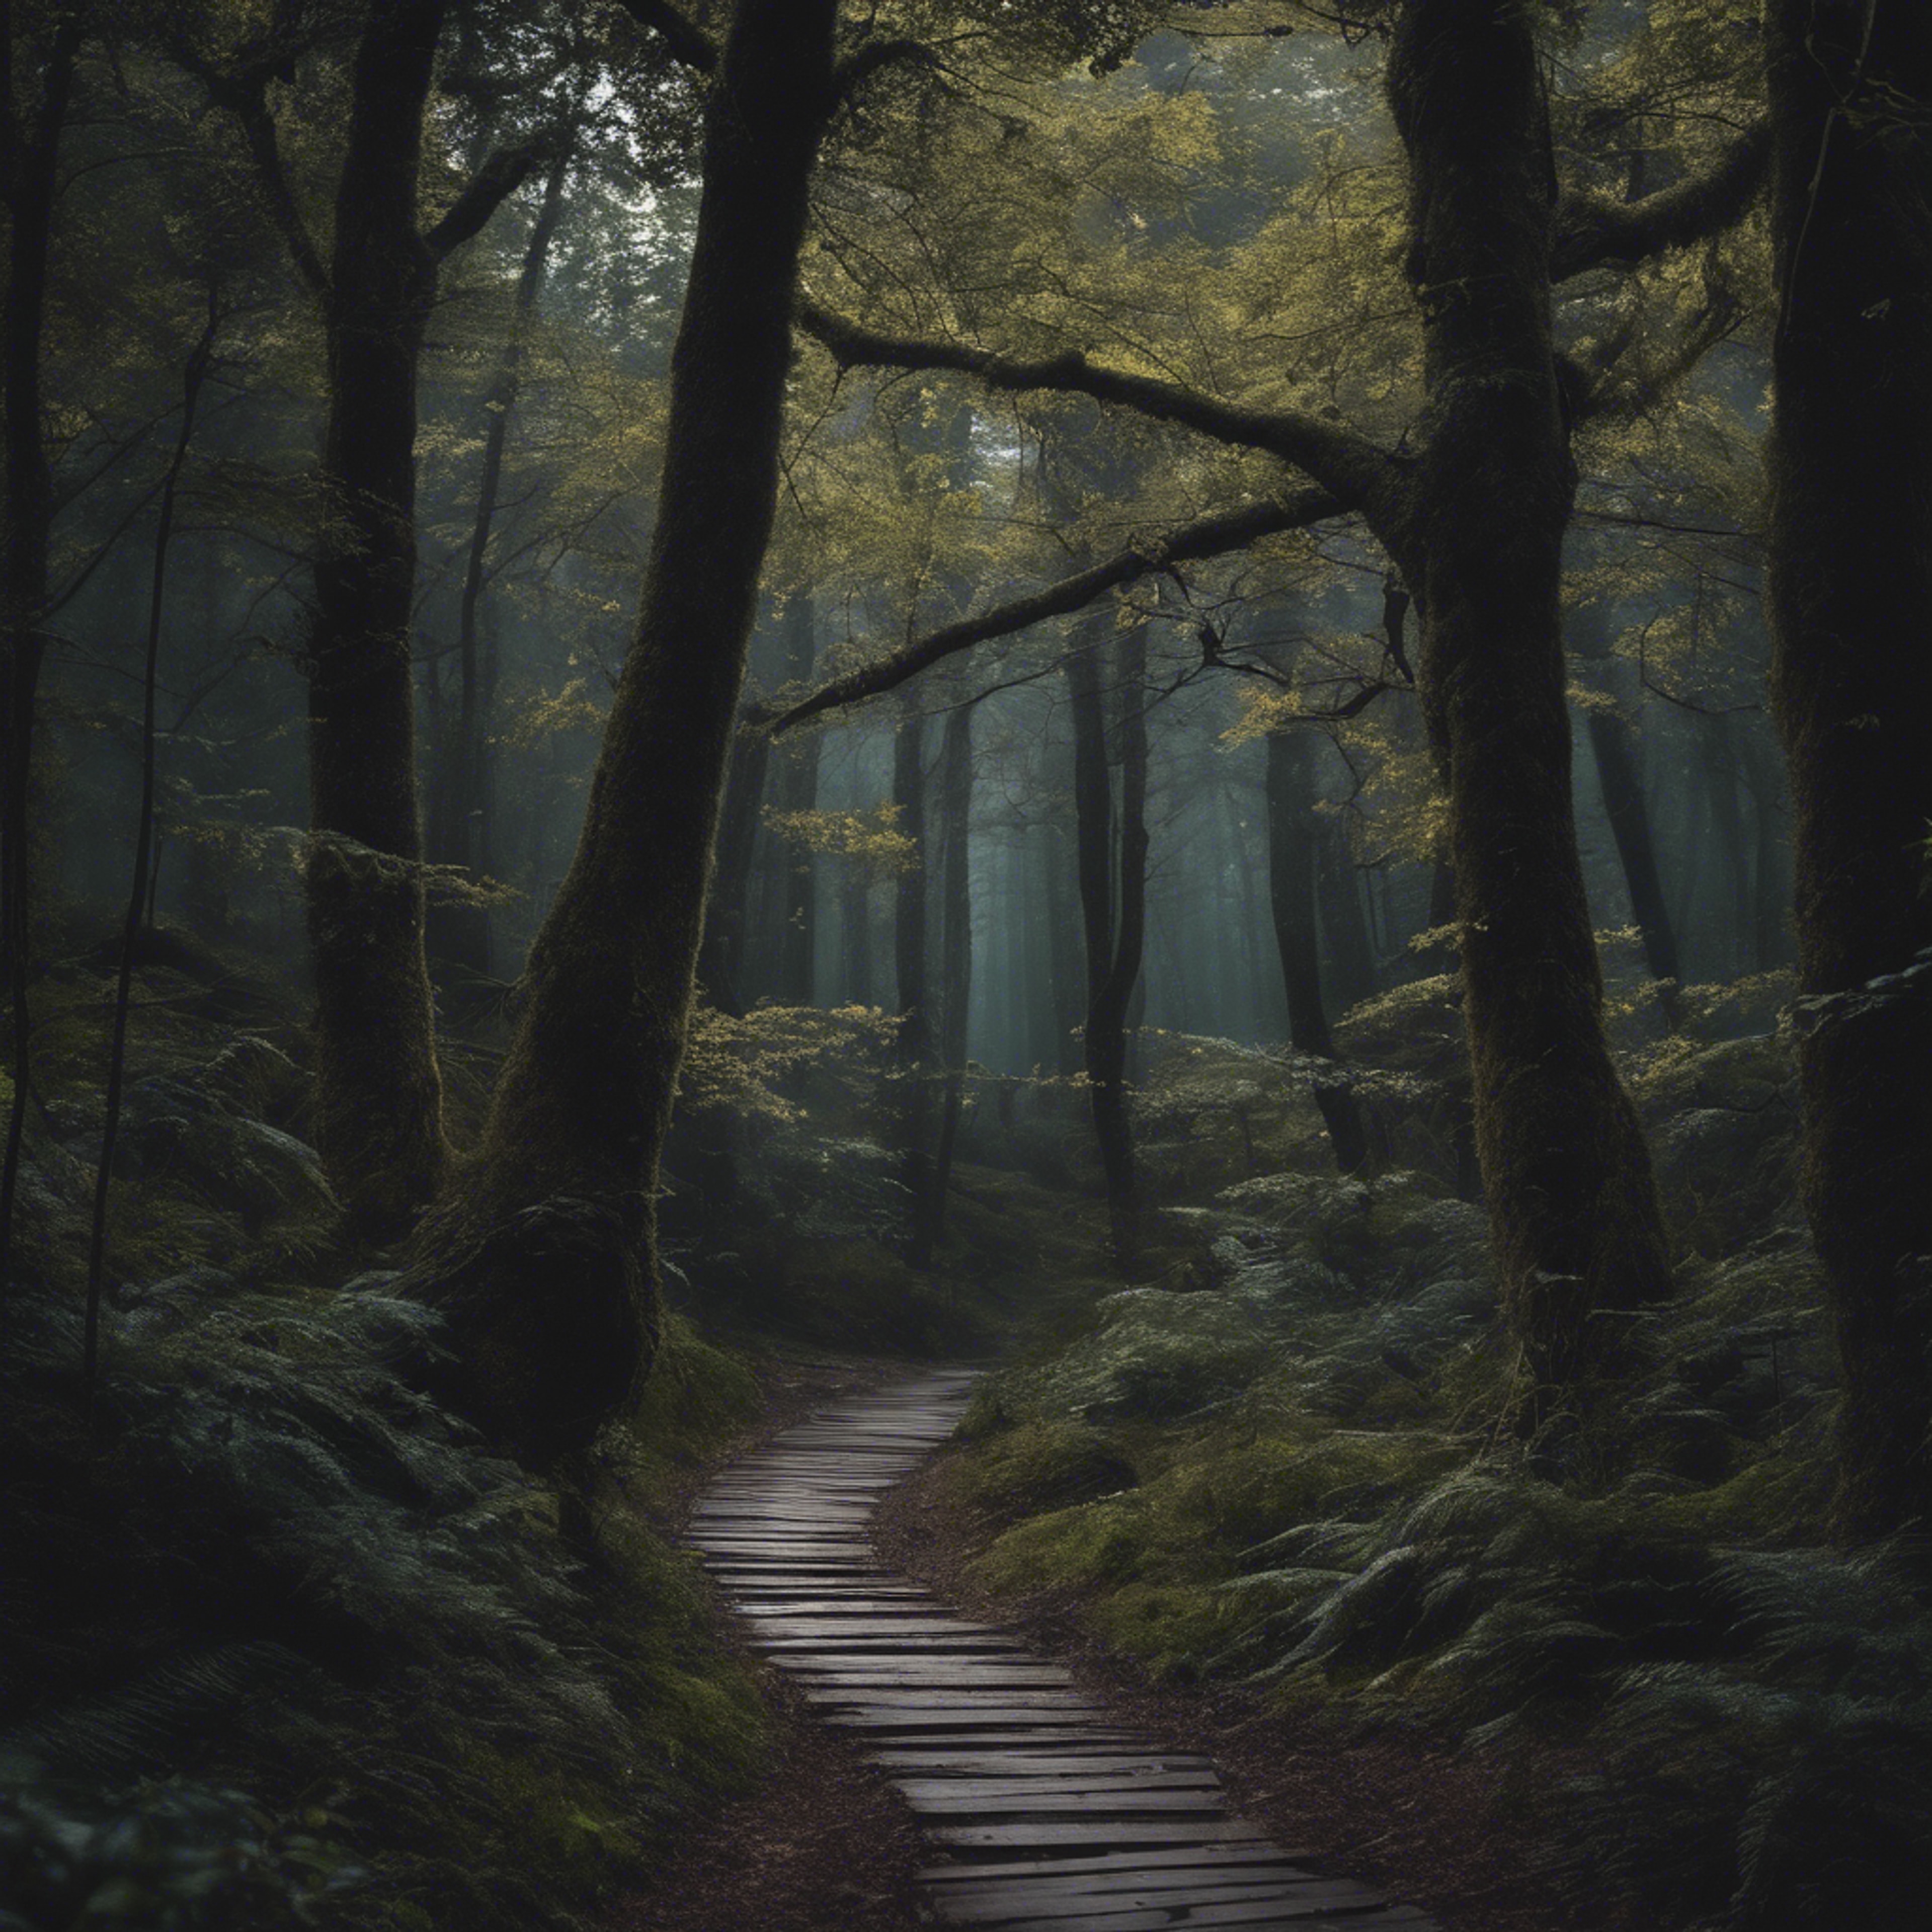 An untraveled path in a dark and mysterious forest Tapet[df6a1d860b87482e8c75]